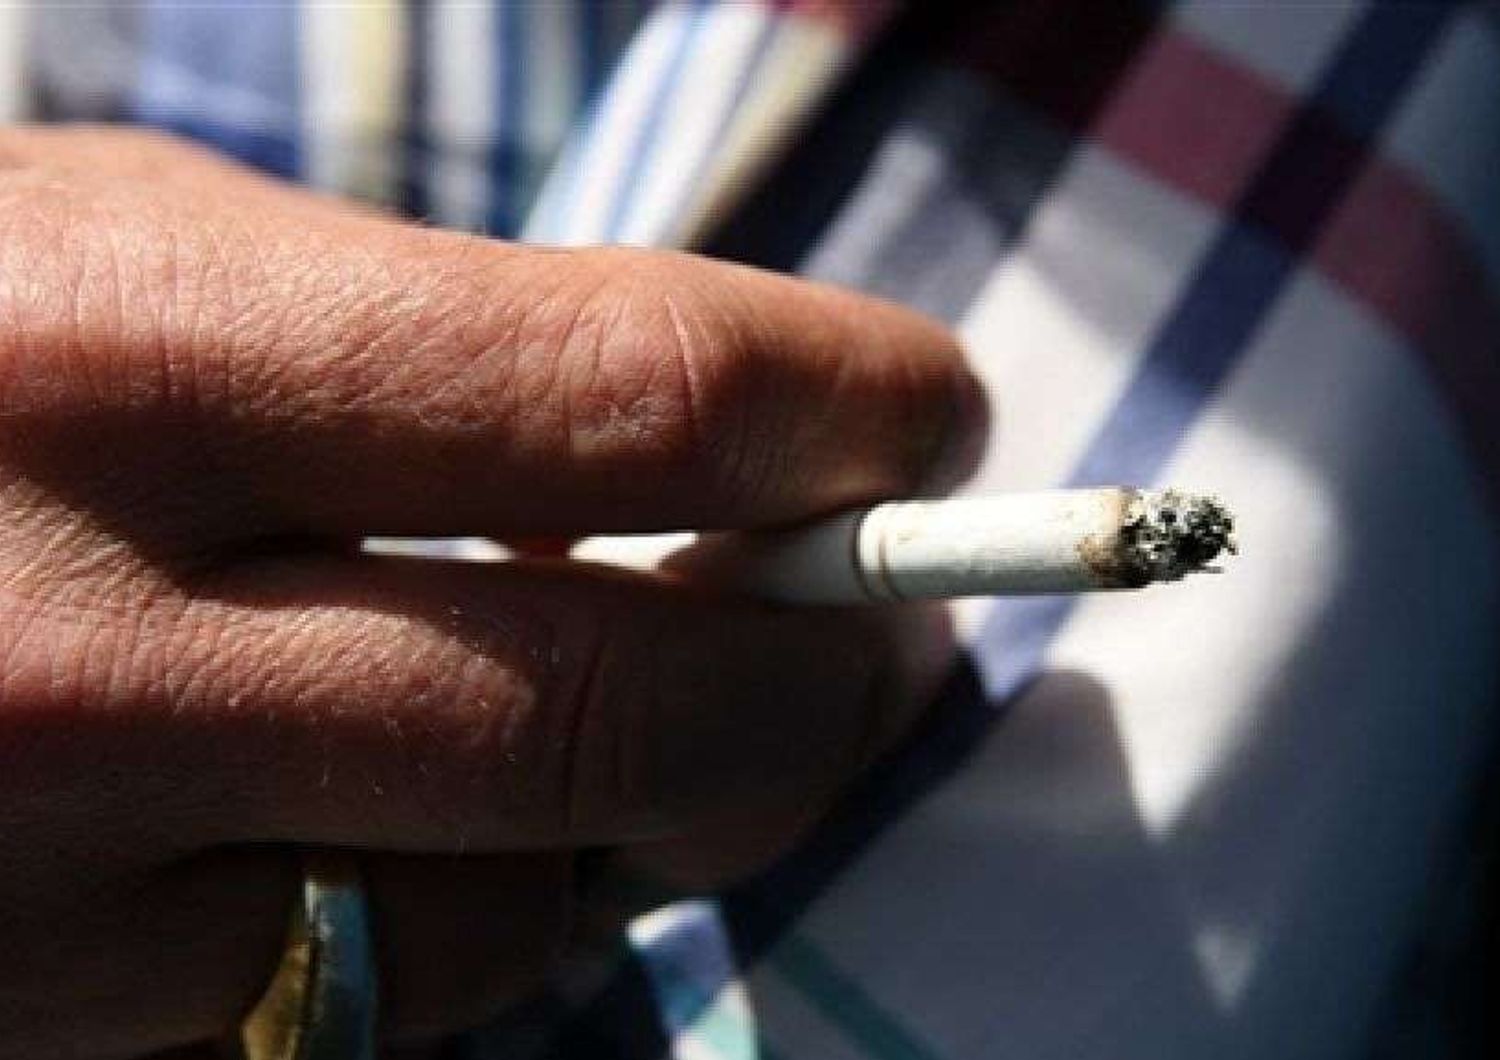 Record payout for cancer death imposed on tobacco firm